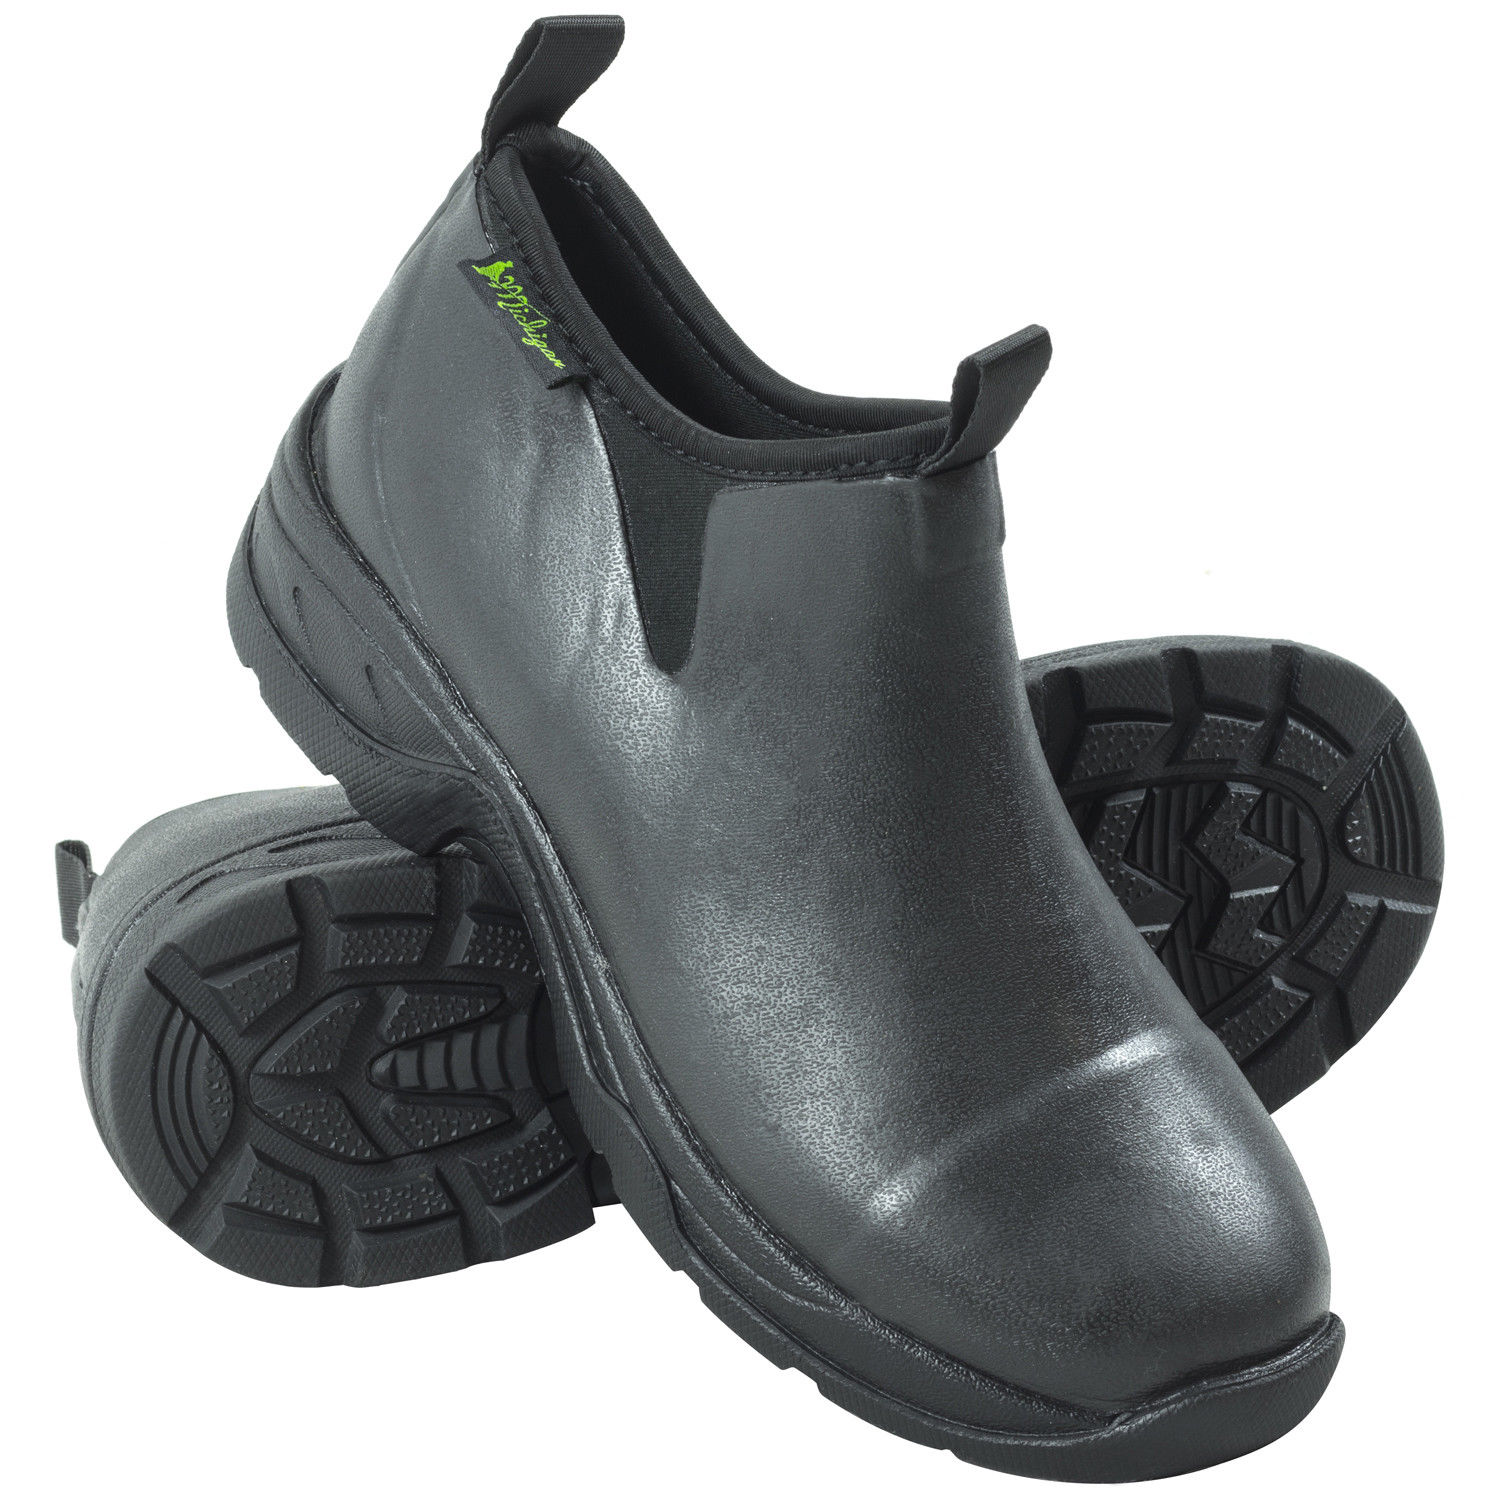 Michigan Slip On Neoprene Ankle Boots Equestrian Stable Yard Shoes | eBay